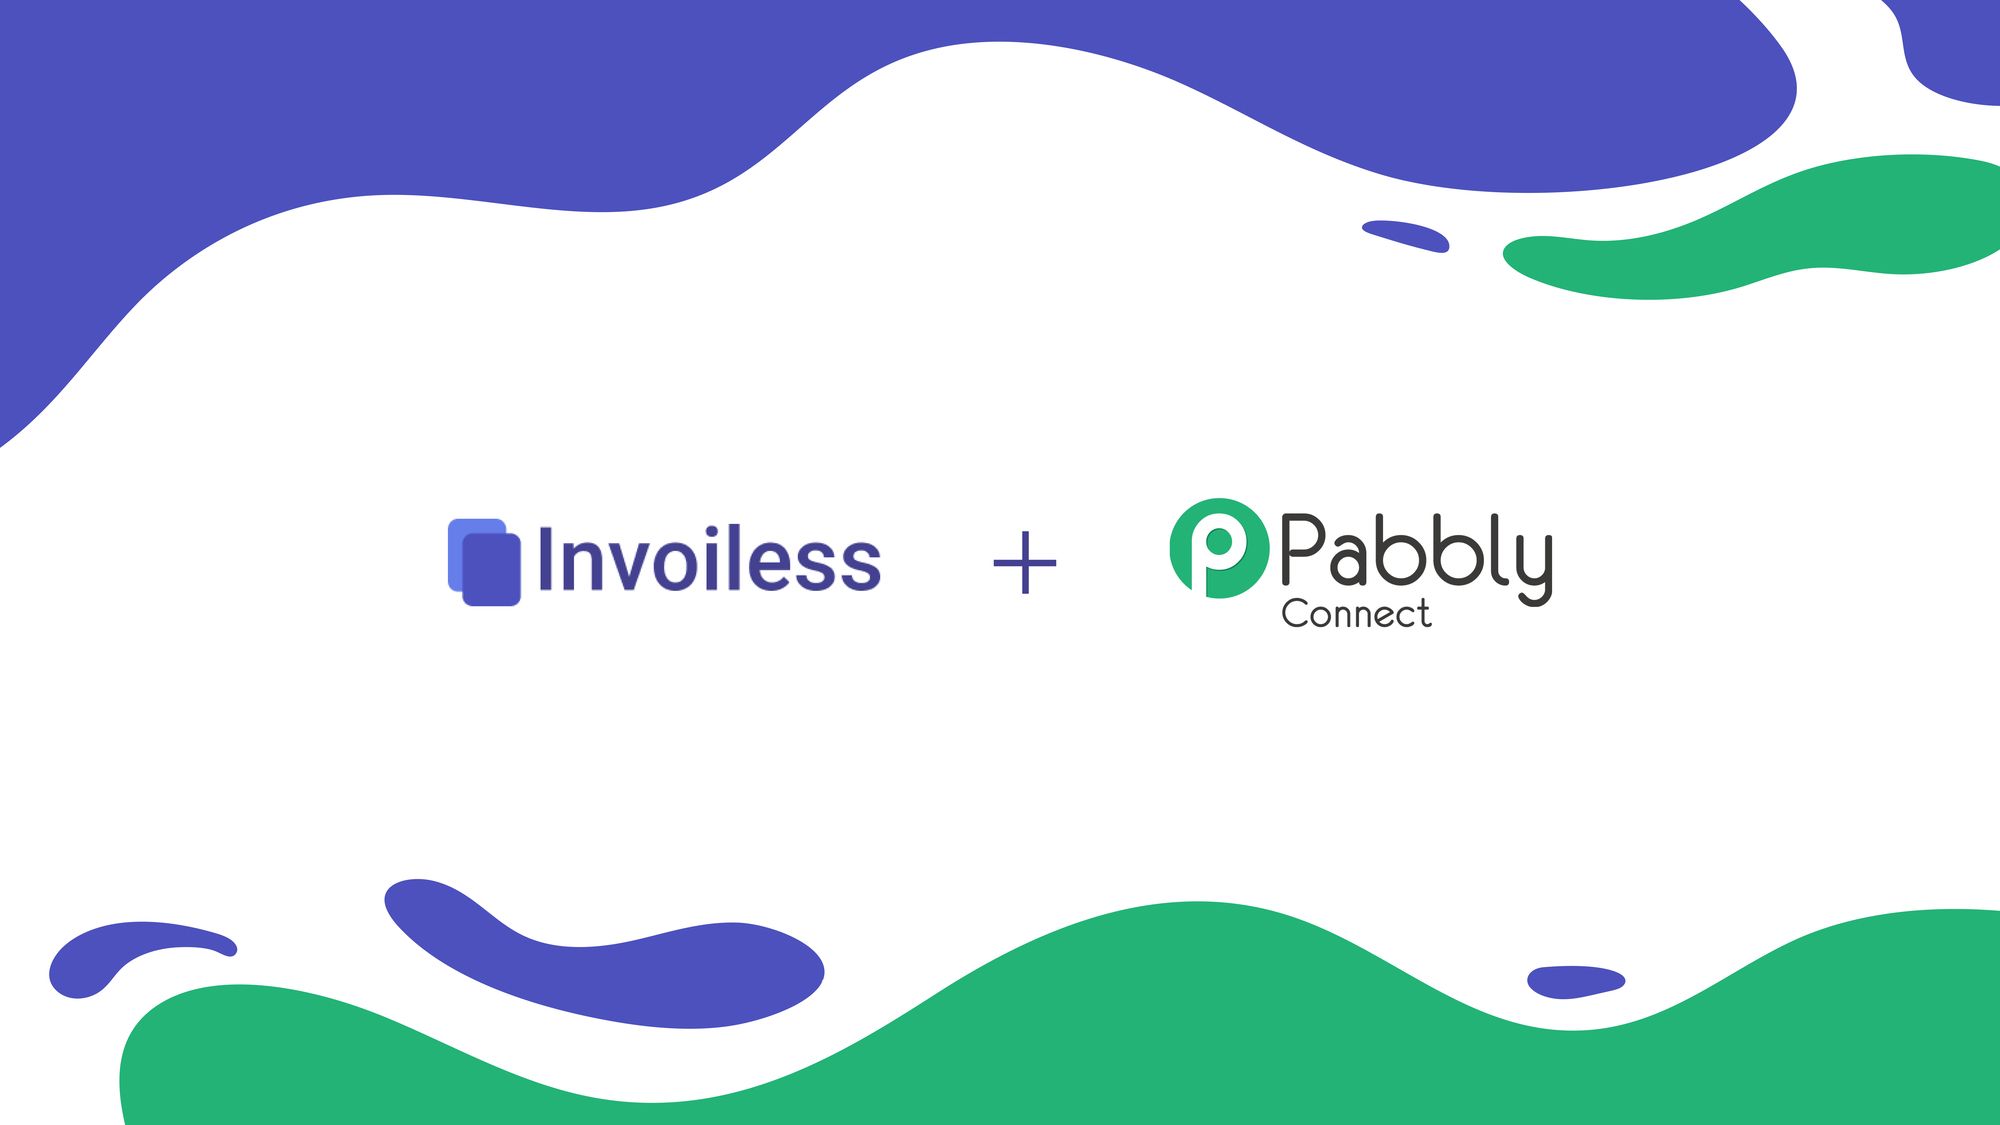 Invoiless + Pabbly